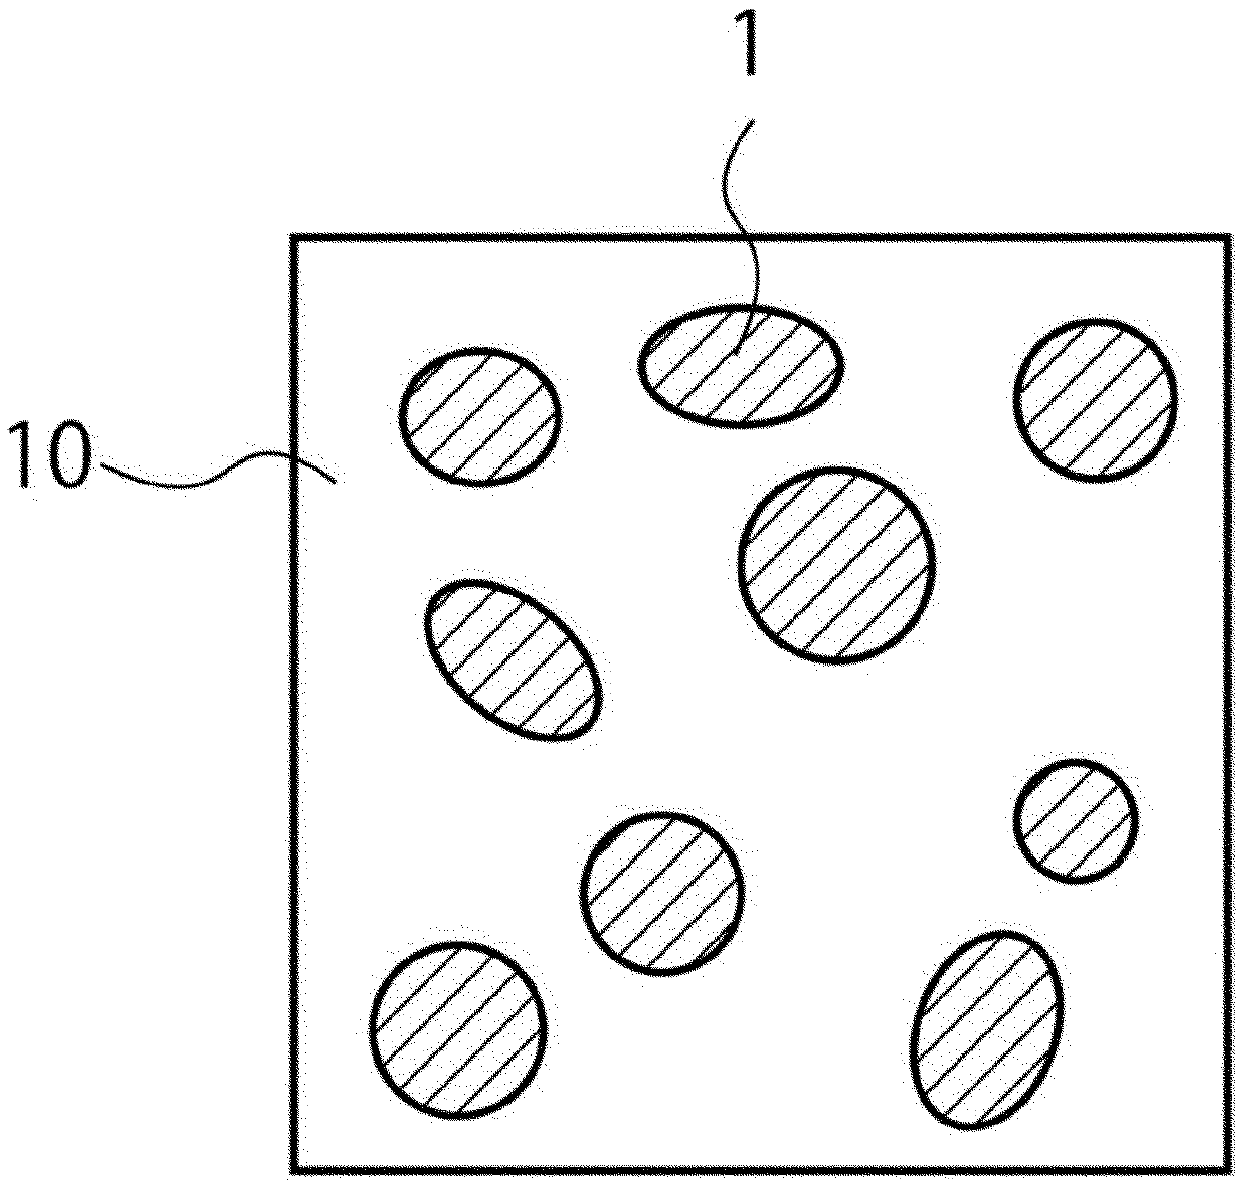 Electrode, membrane electrode assembly, electrochemical cell, stack, fuel cell, vehicle and flying object